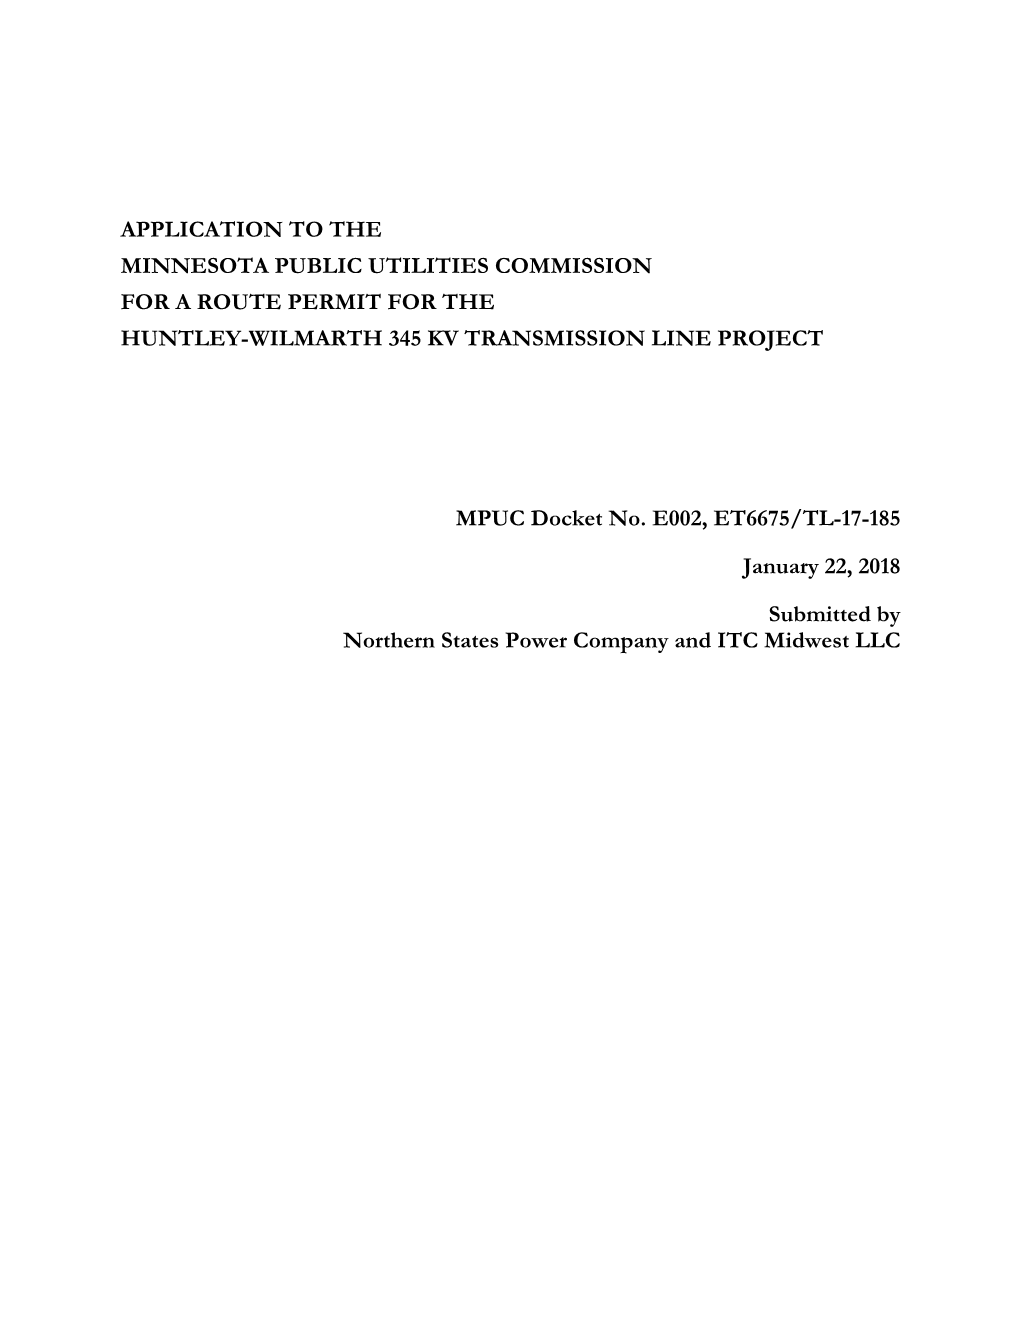 Route Permit Application Table of Contents